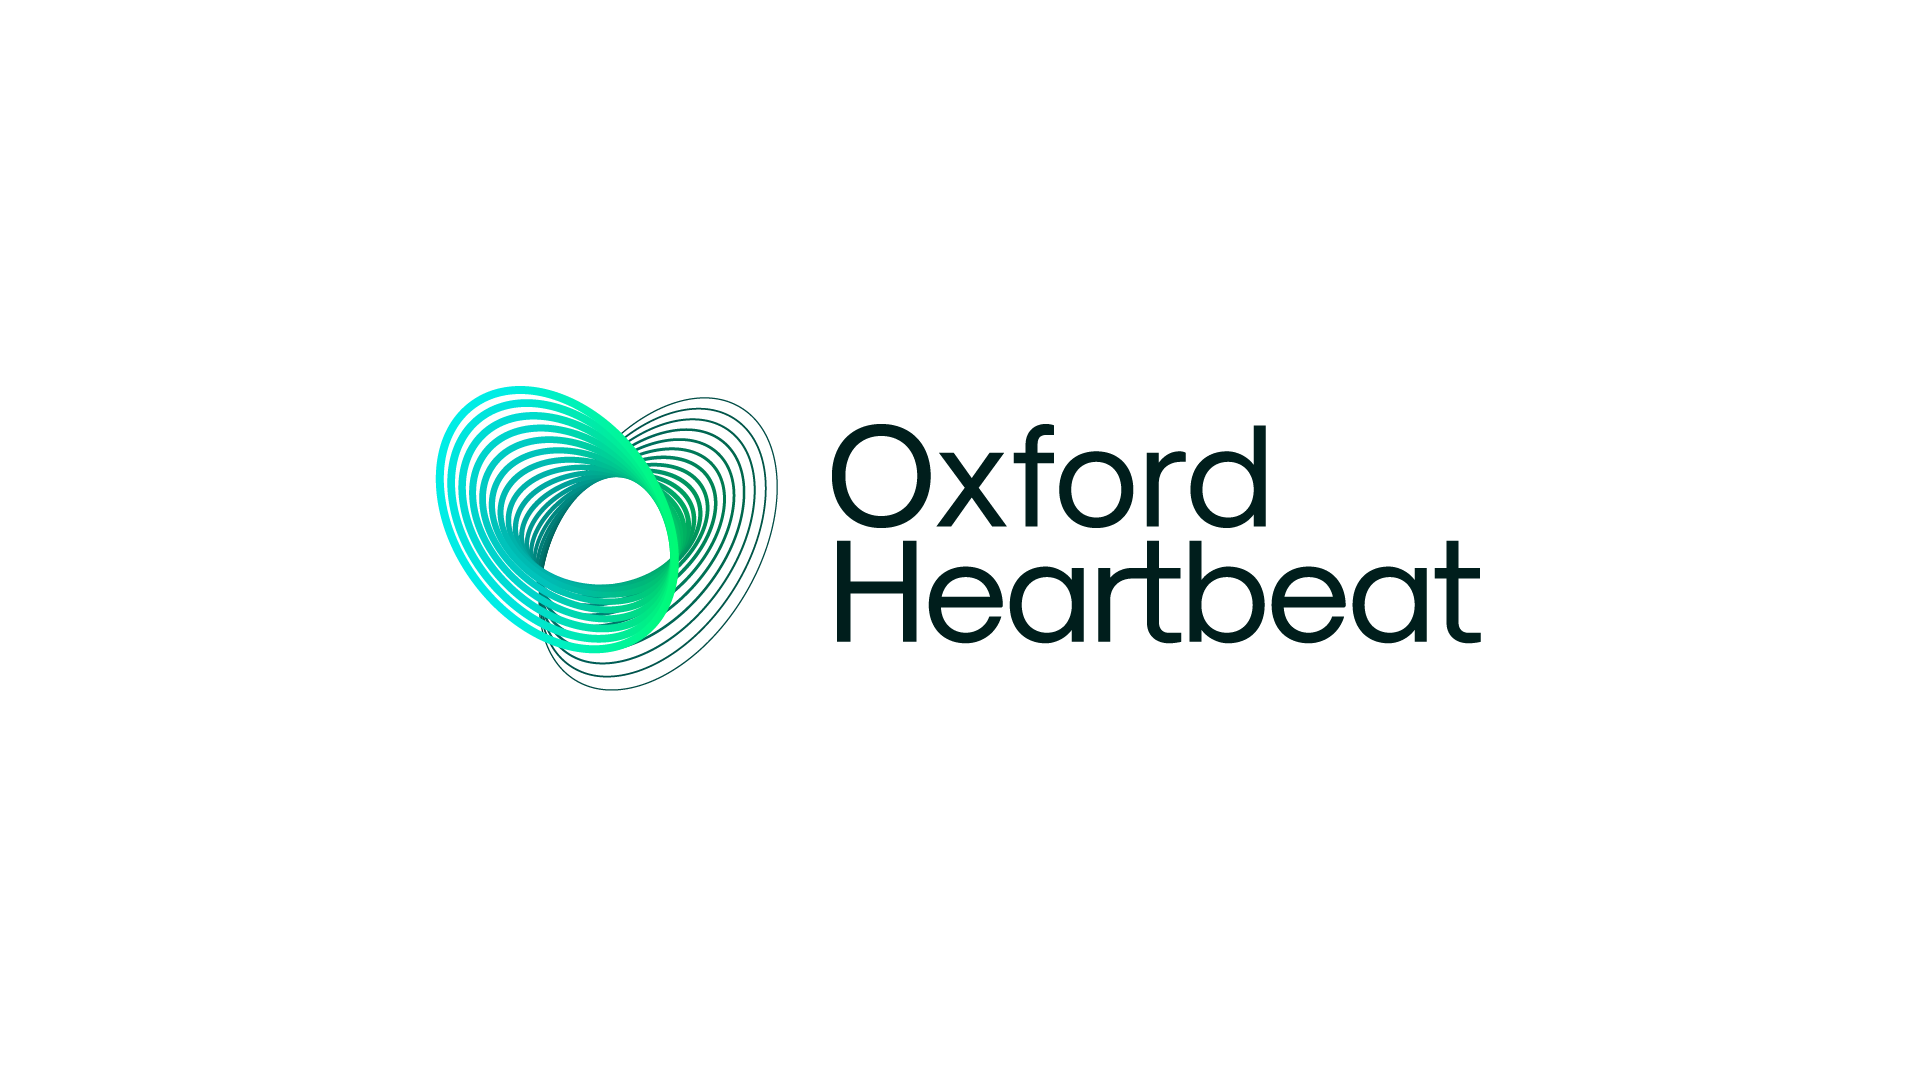 Medical Company logo, features abstract heart shape, symbolizing care and commitment to health